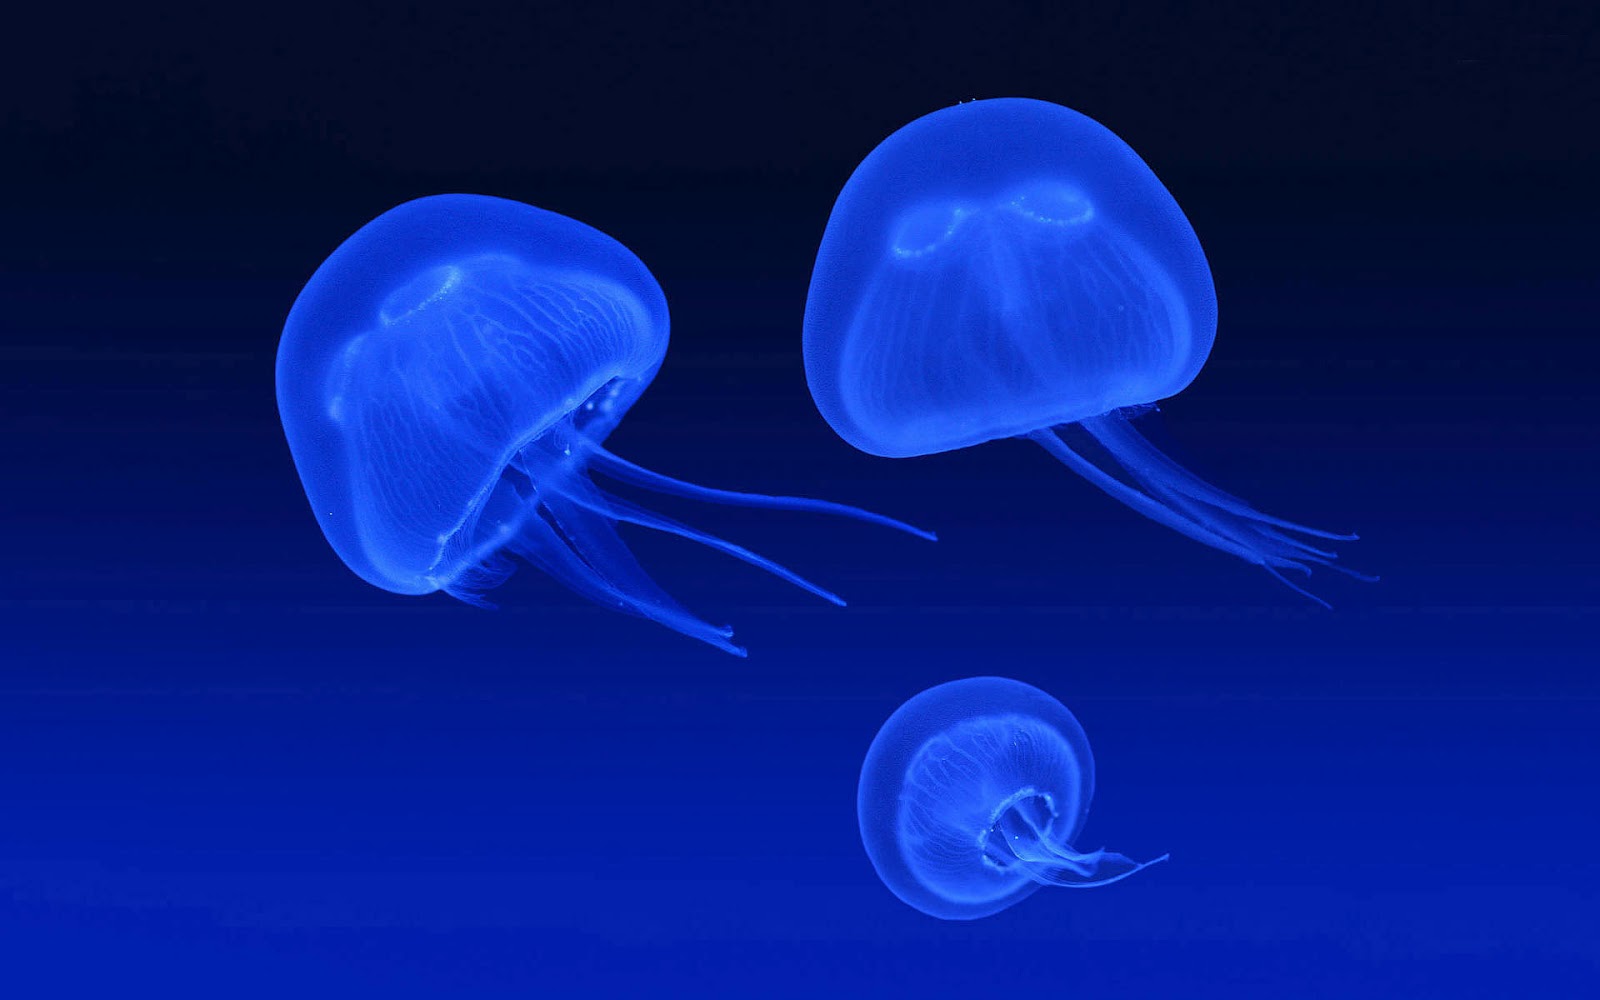 http://1.bp.blogspot.com/-Y3Bi4W1qtBw/UDkR6SRr3cI/AAAAAAAABH0/P48xRcw6gzA/s1600/hd-jellyfish-wallpaper-with-blue-jellyfish-swimming-underwater-jellyfish-wallpapers-backgrounds-pictures-photos.jpg